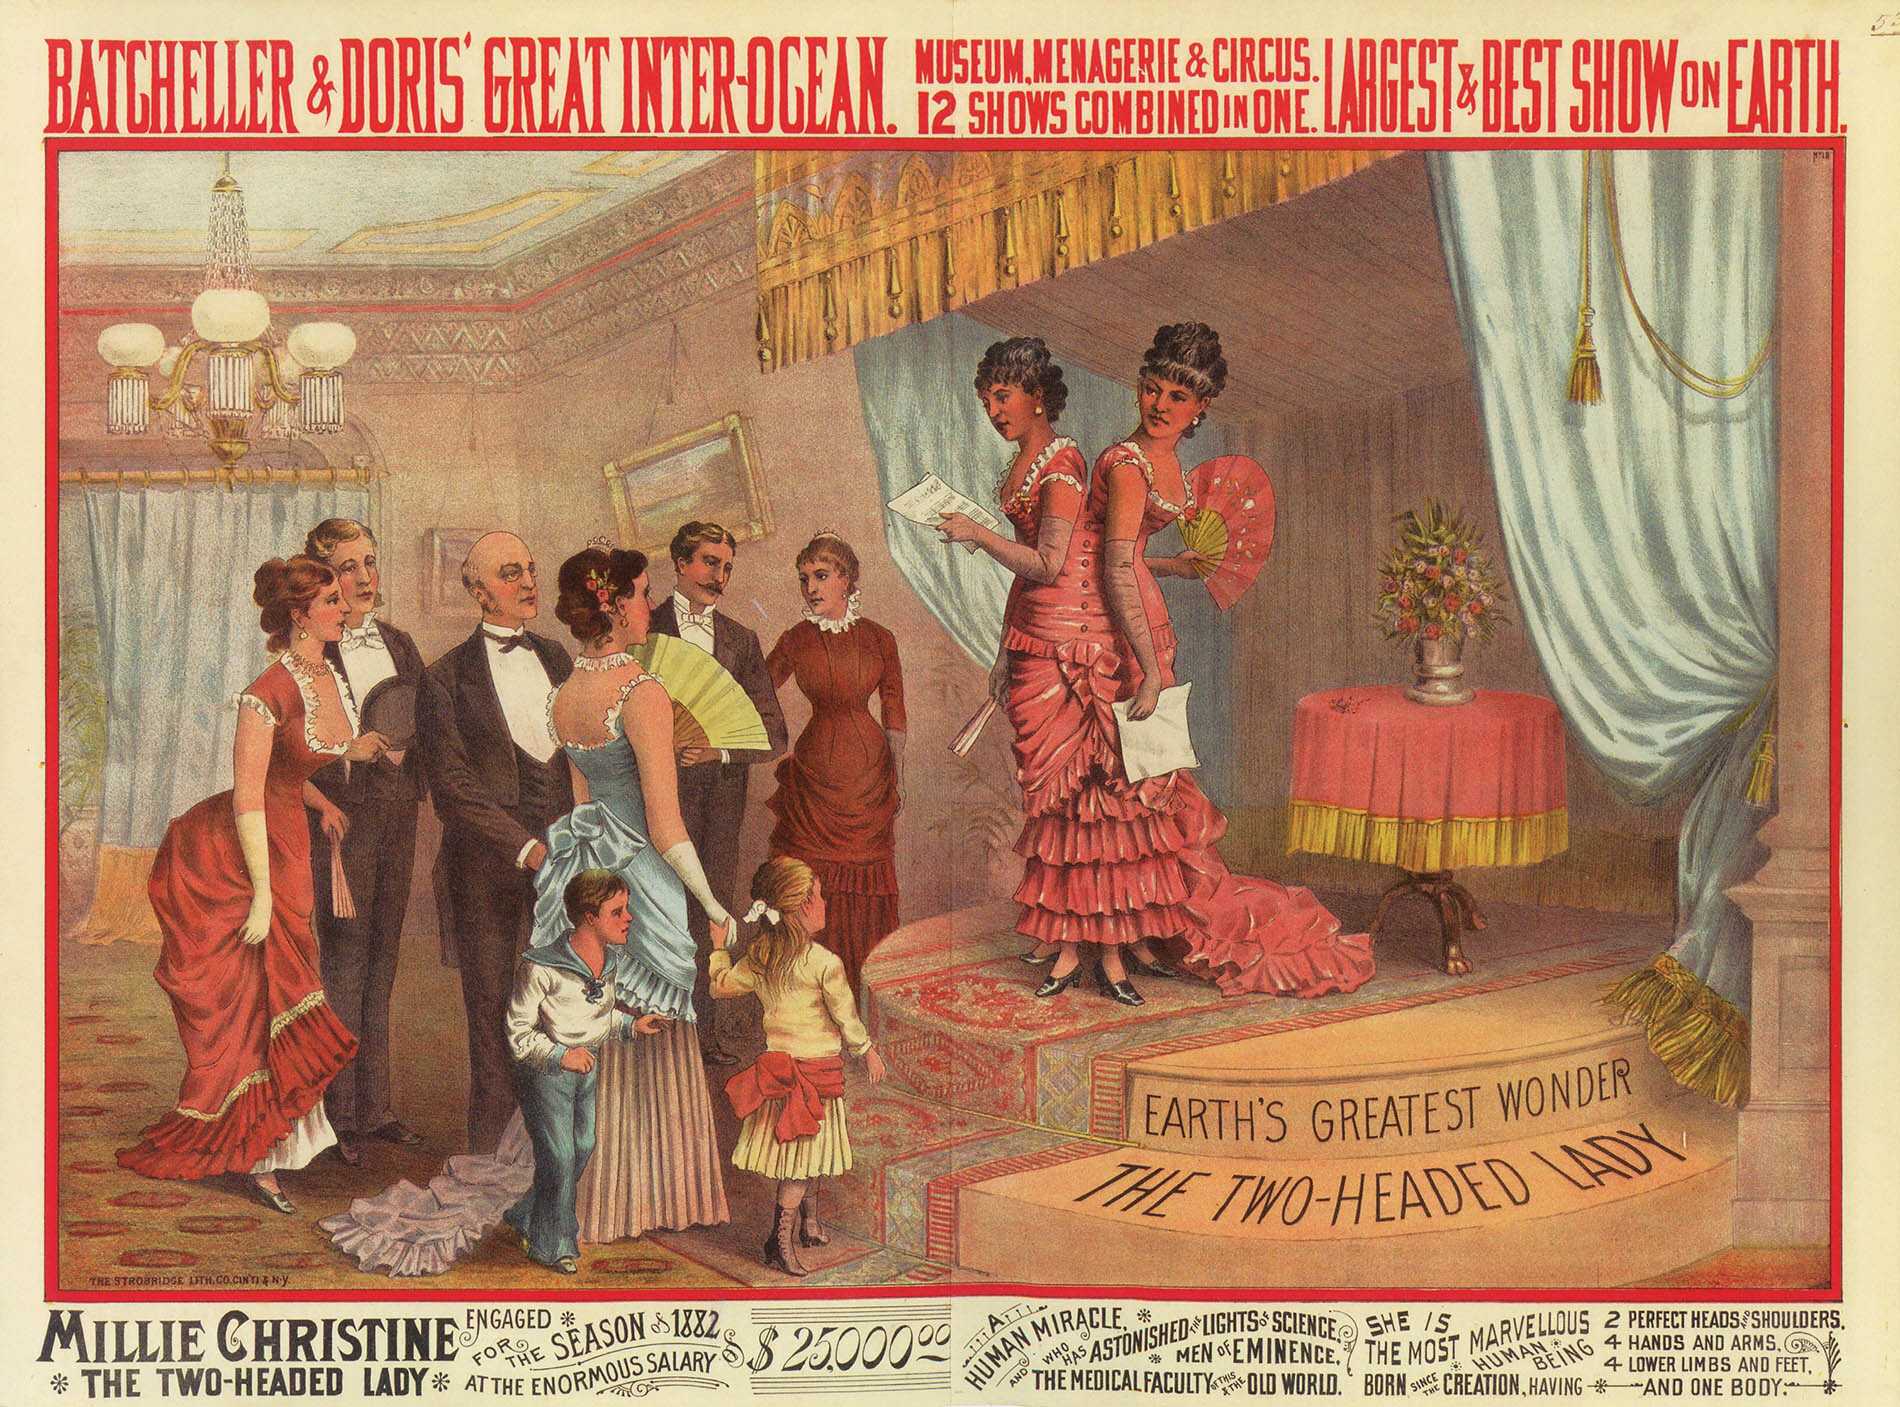 Color advertisement for show including Mille Christine McCoy performance